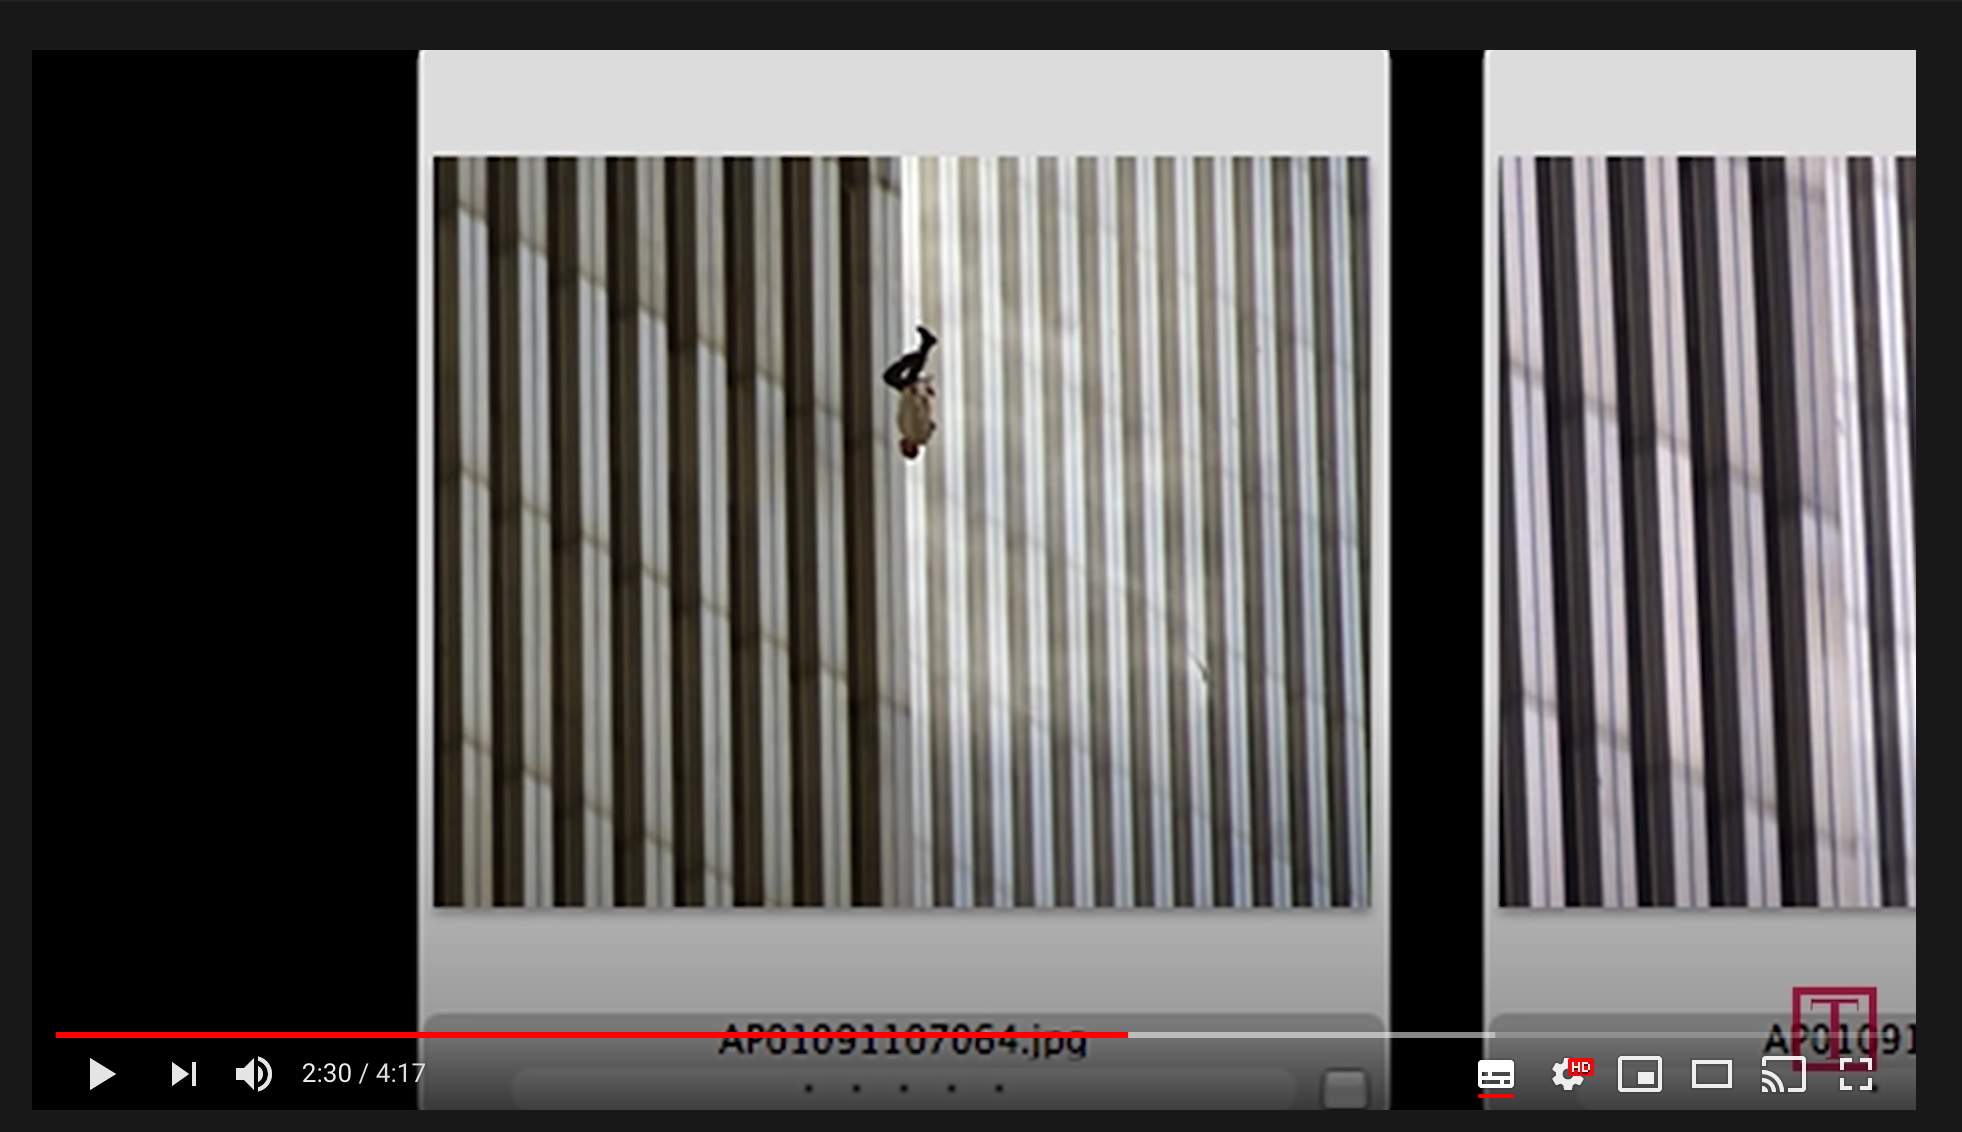 7 YouTube Videos Highlighting the Role of Photography on 9/11